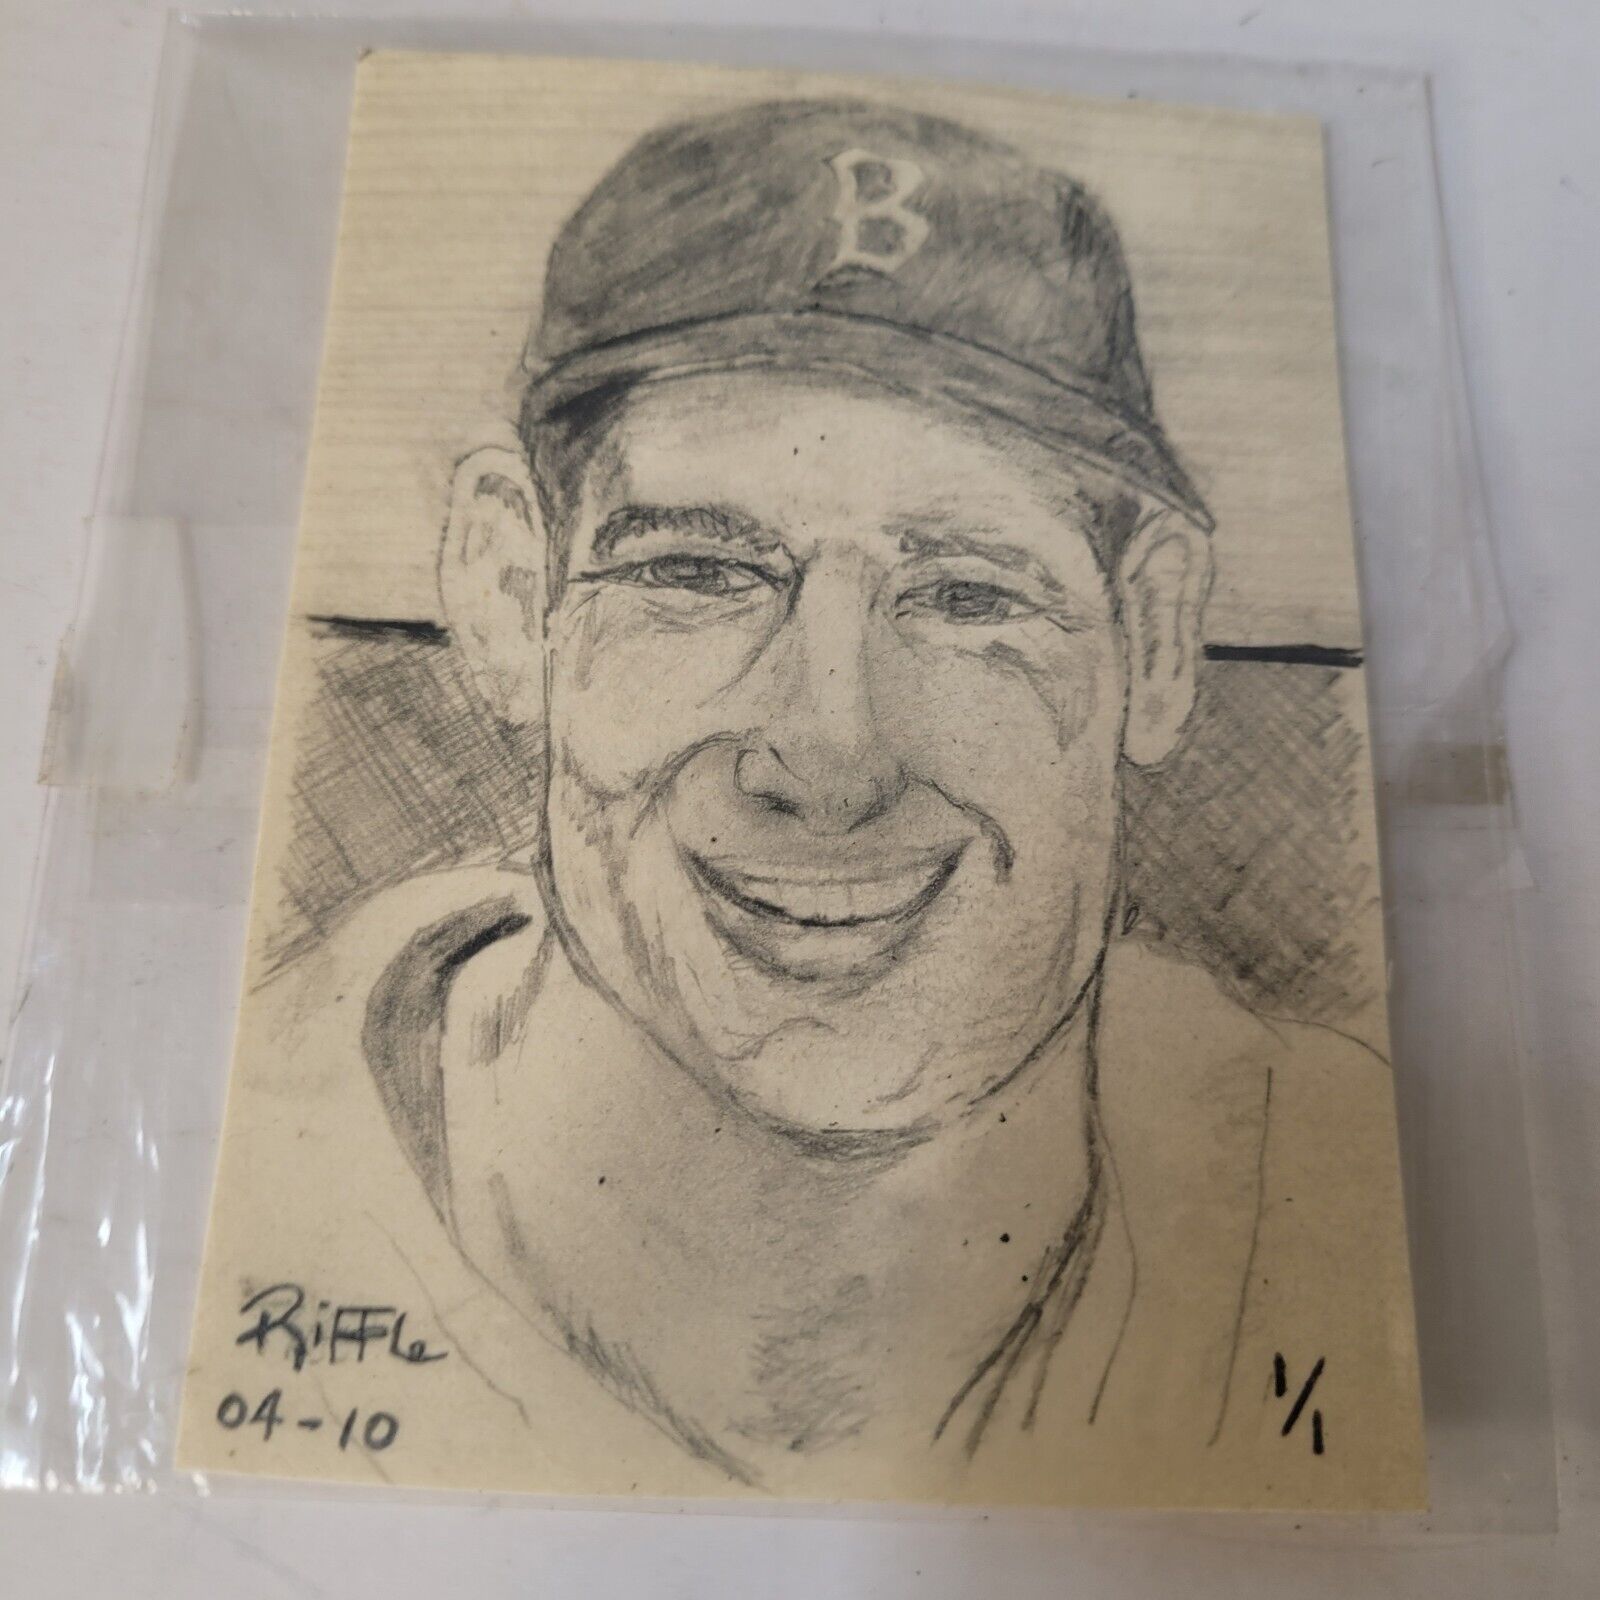 2010 TED WILLIAMS  1/1 MASTERPIECE ART SKETCH CARD ARTIST SIGNED HAND DRAWN